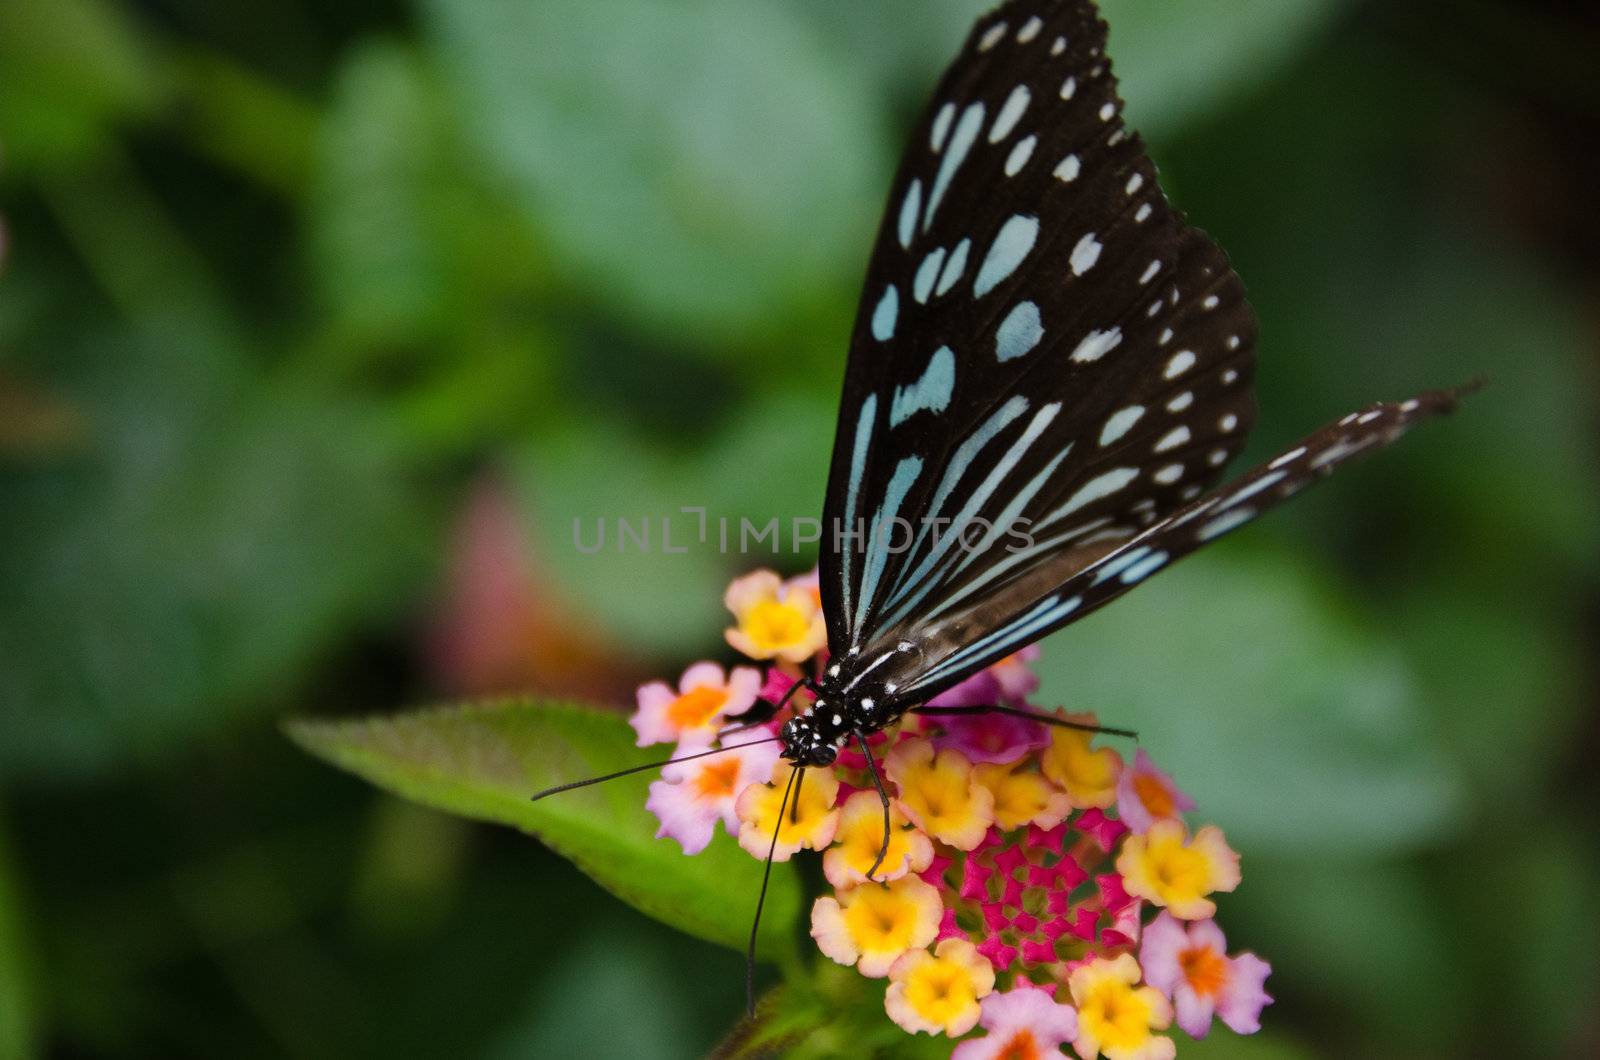 Blue butterfly, Ideopsis sp. from Japan sitting and feeding nectar on a flower